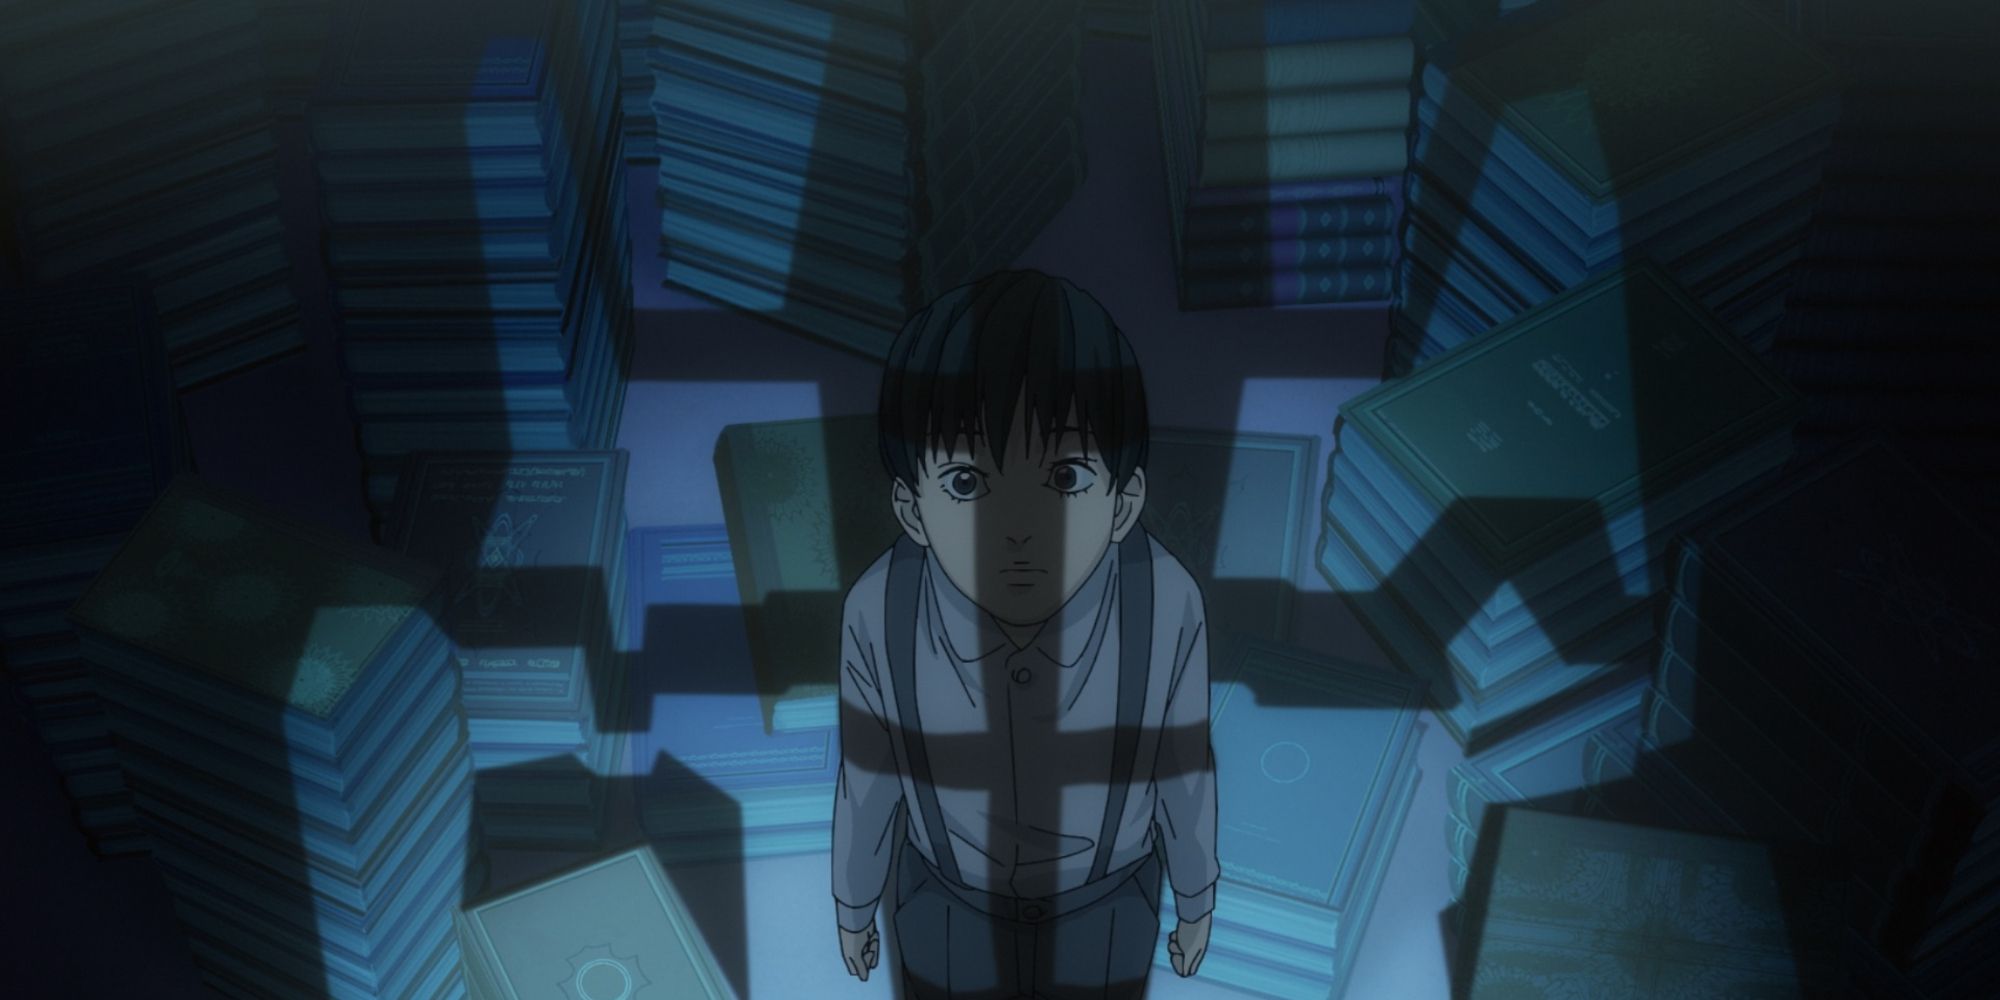 anime- a young boy cast in shadow and surrounded by books